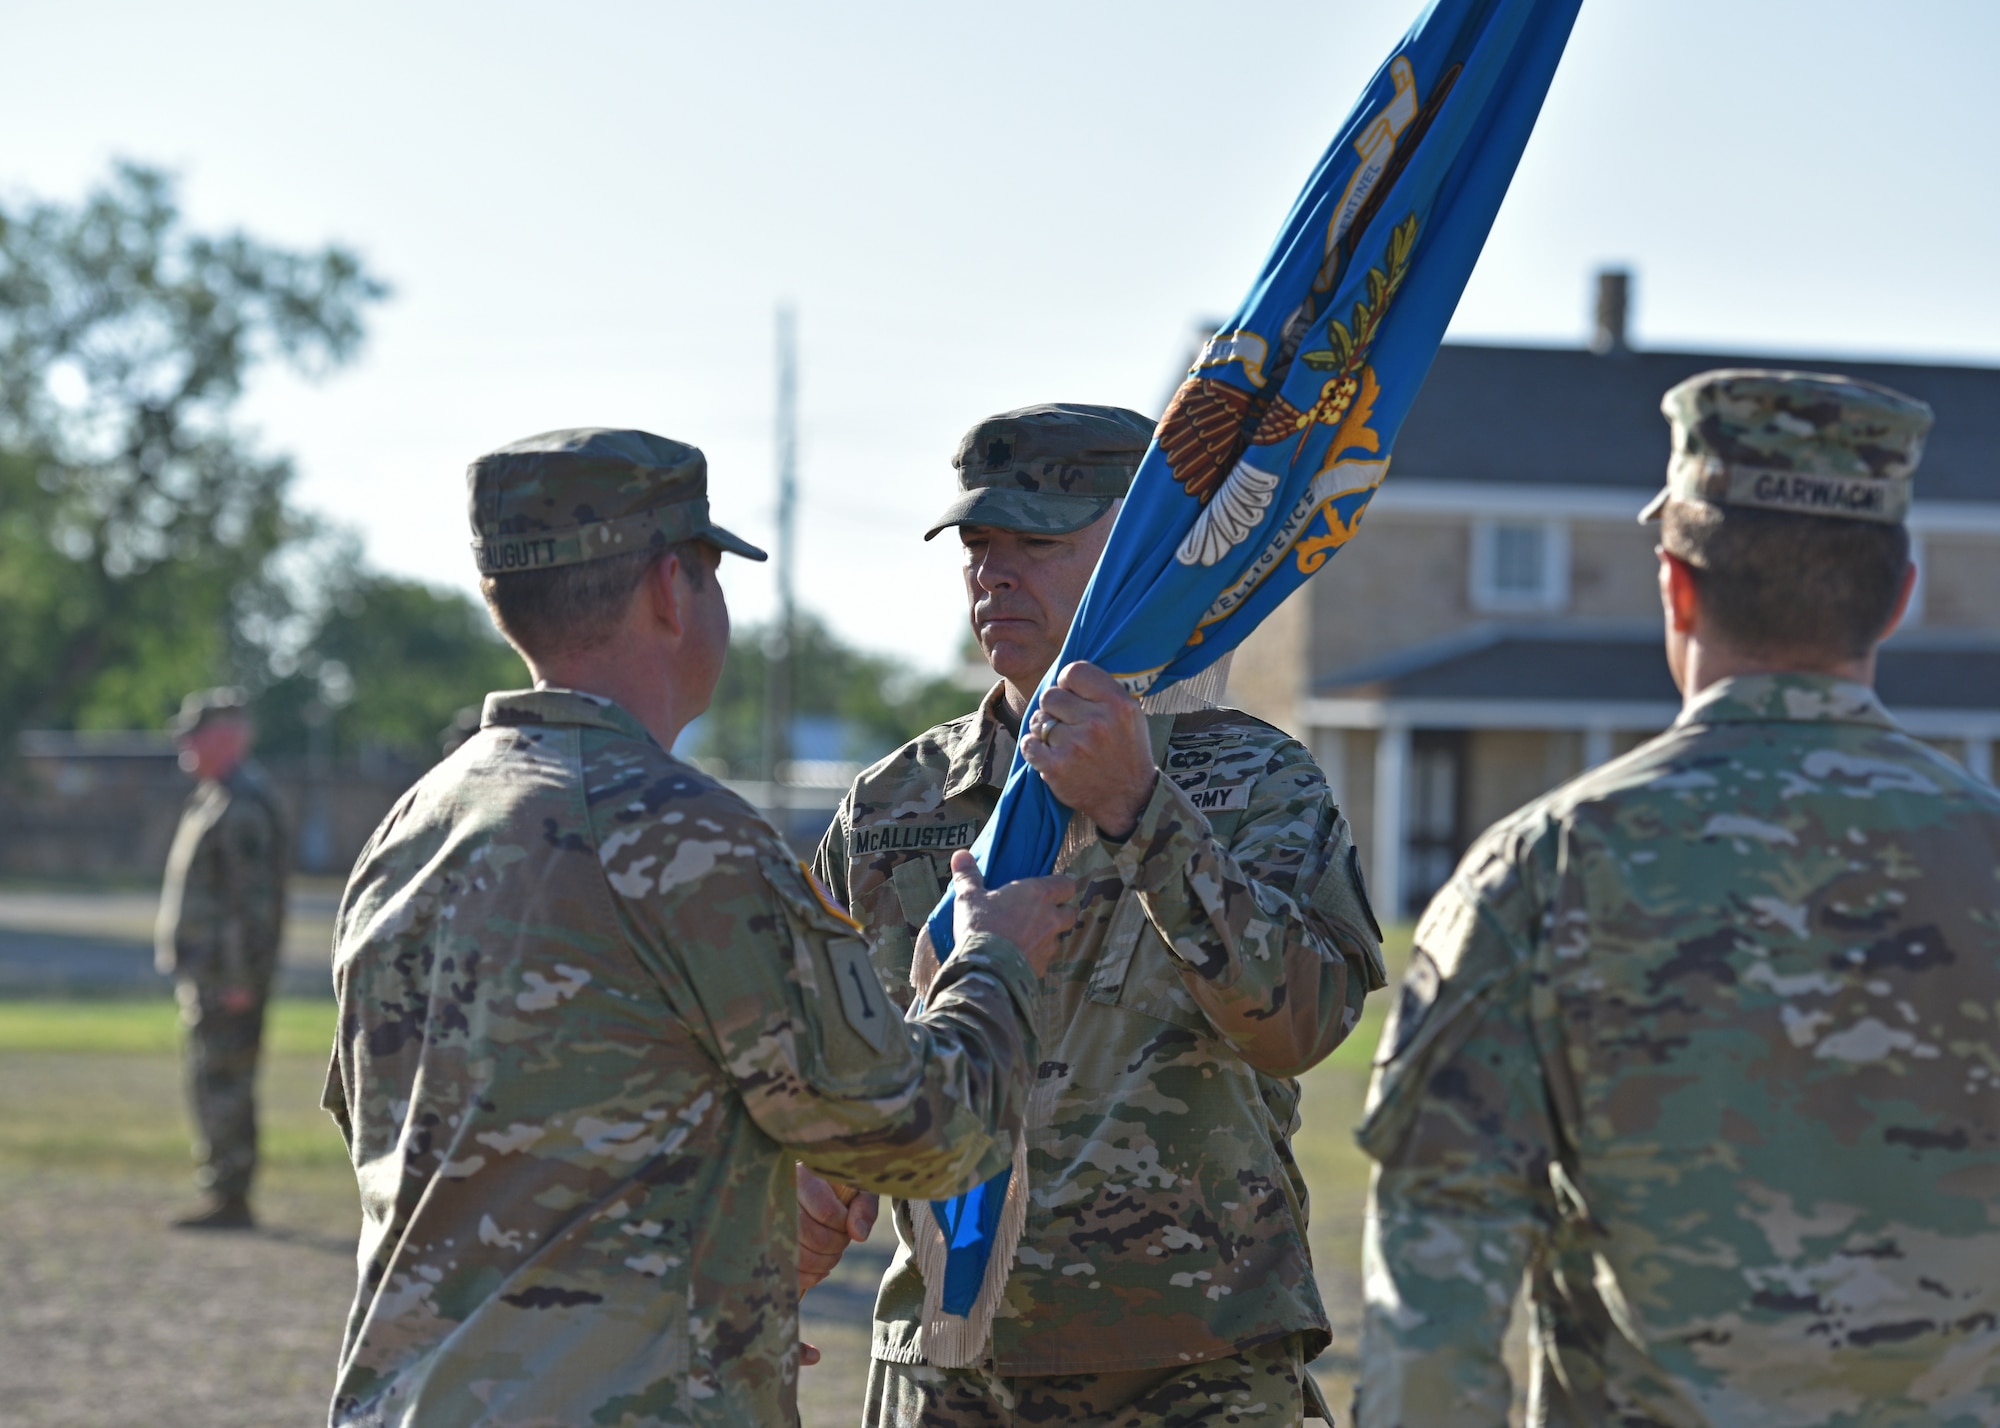 U.S. Army Lt. Col. John McAllister, middle, incoming 344th Military Intelligence Battalion commander, assumes command from Col. Loren Traugutt, 111th Military Intelligence Brigade commander, during the 344th MI BN change of command ceremony at Fort Concho, San Angelo, Texas, June 21, 2022. Through the passing of the guidon, Traugutt accepted command from Lt. Col. Joseph Garwacki, outgoing 344th MI BN commander, and transferred responsibility for accomplishing the mission to McAllister. (U.S. Air Force photo by Senior Airman Ashley Thrash)